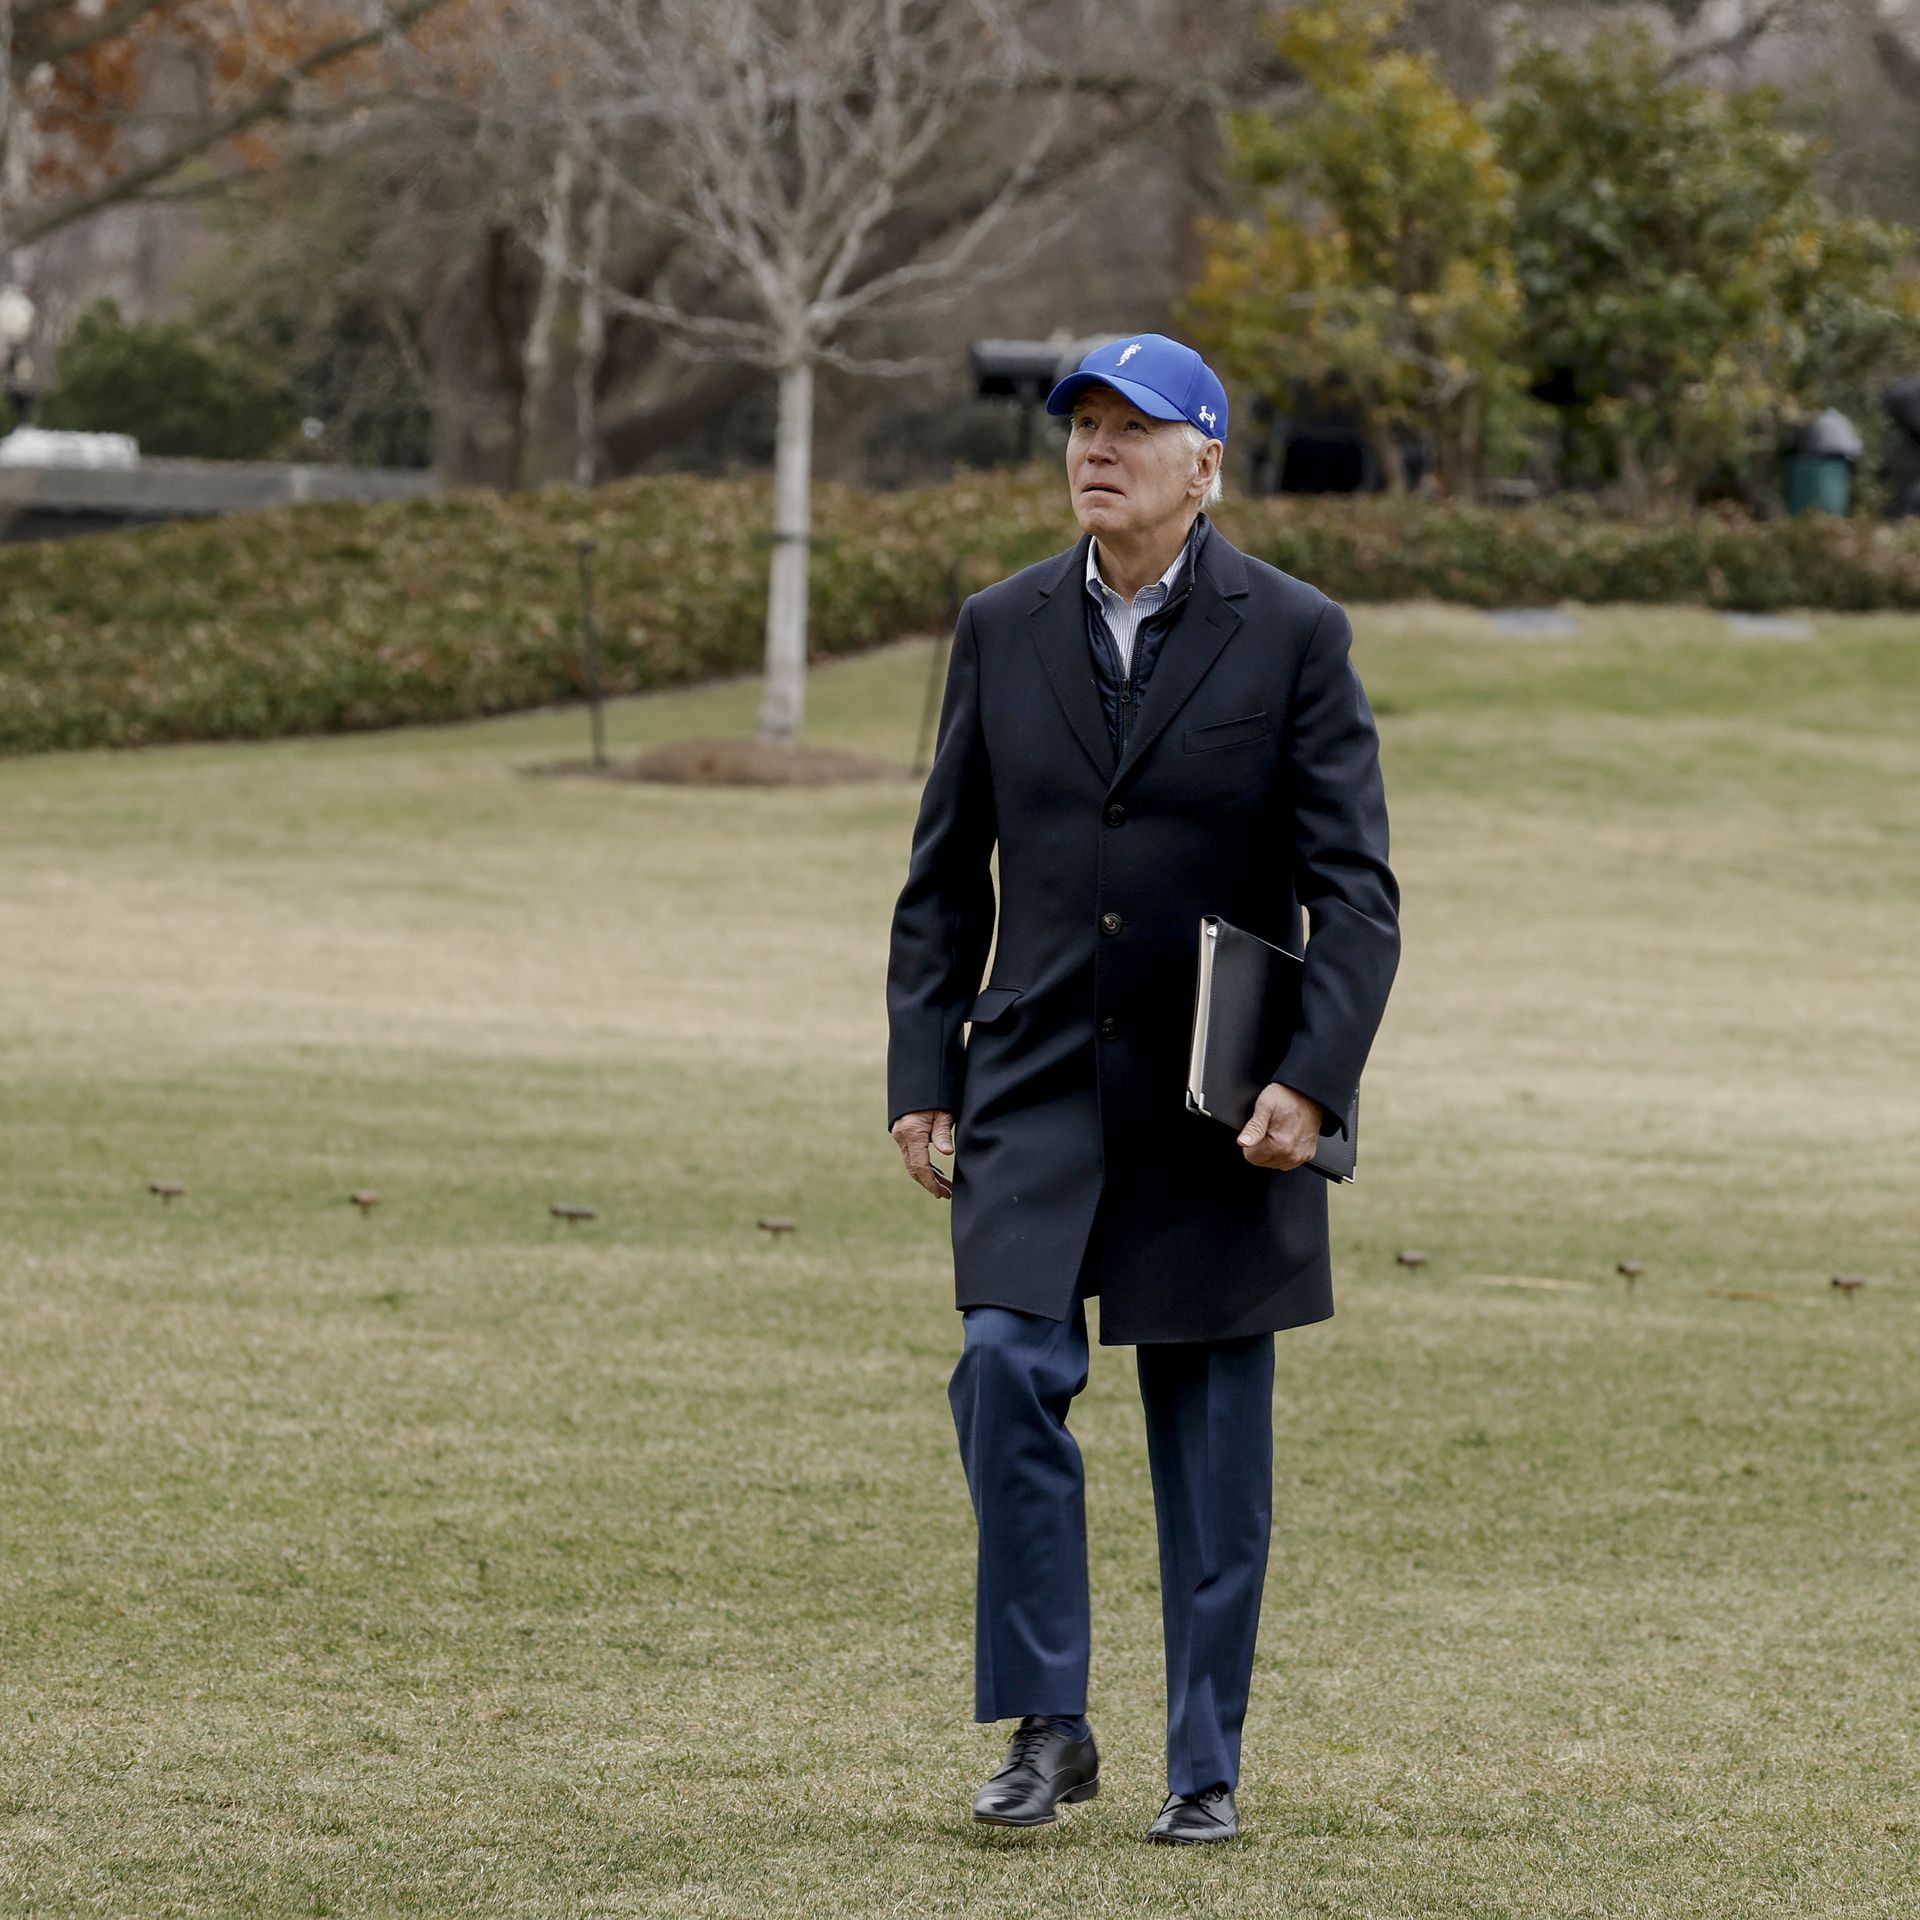 Joe Biden walks in winter grass on the White House south lawn, looking up the sky in his blue baseball cap